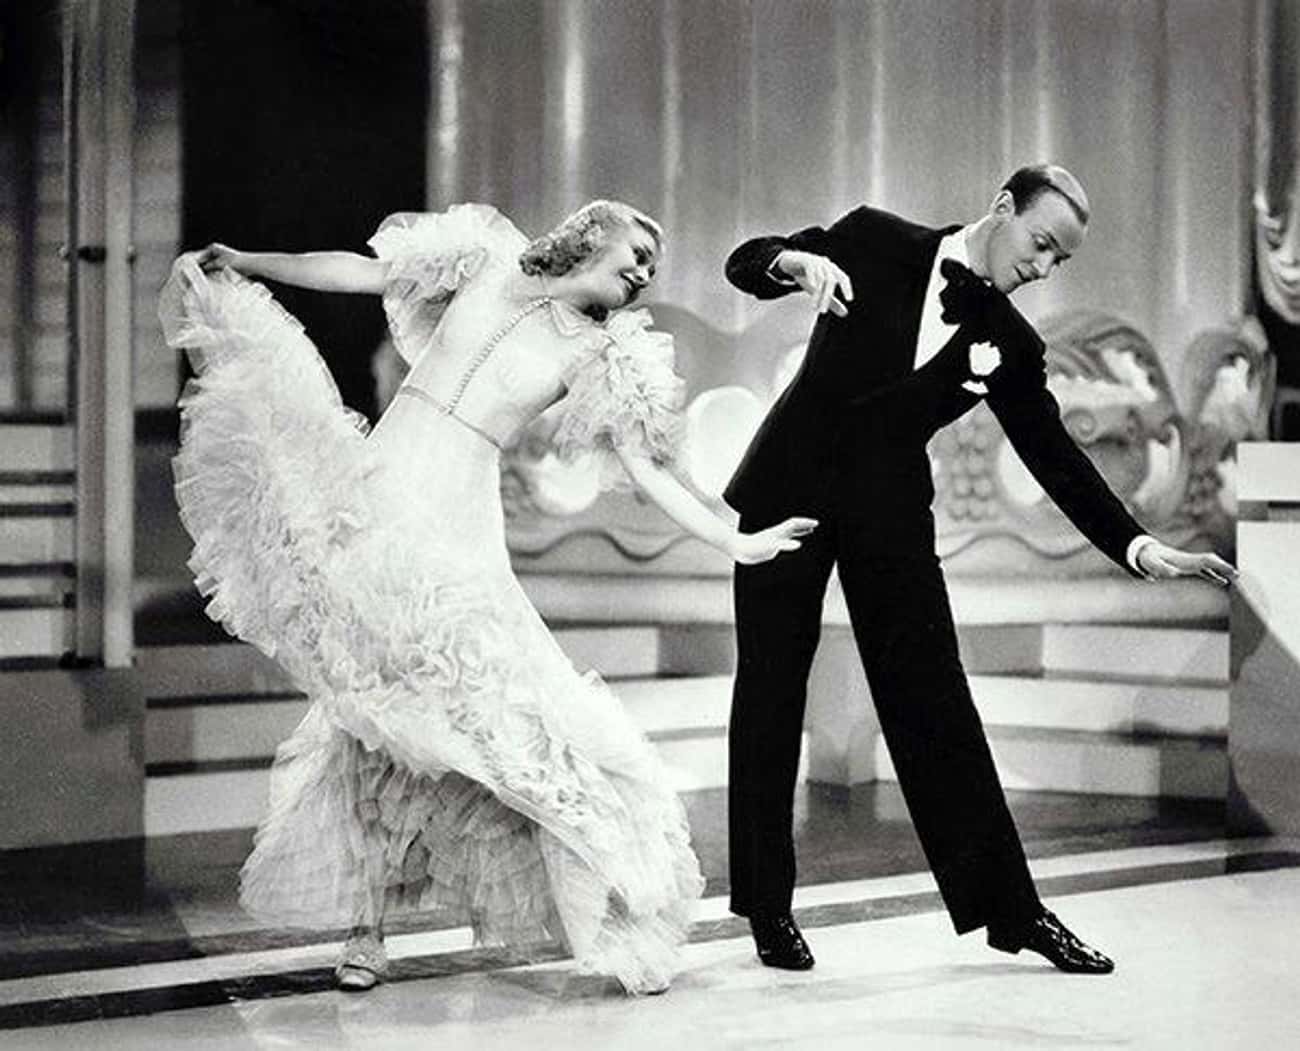 Fred Astaire Had To Tap His Feet After Filming So Editors Could Add The Sound To The Film